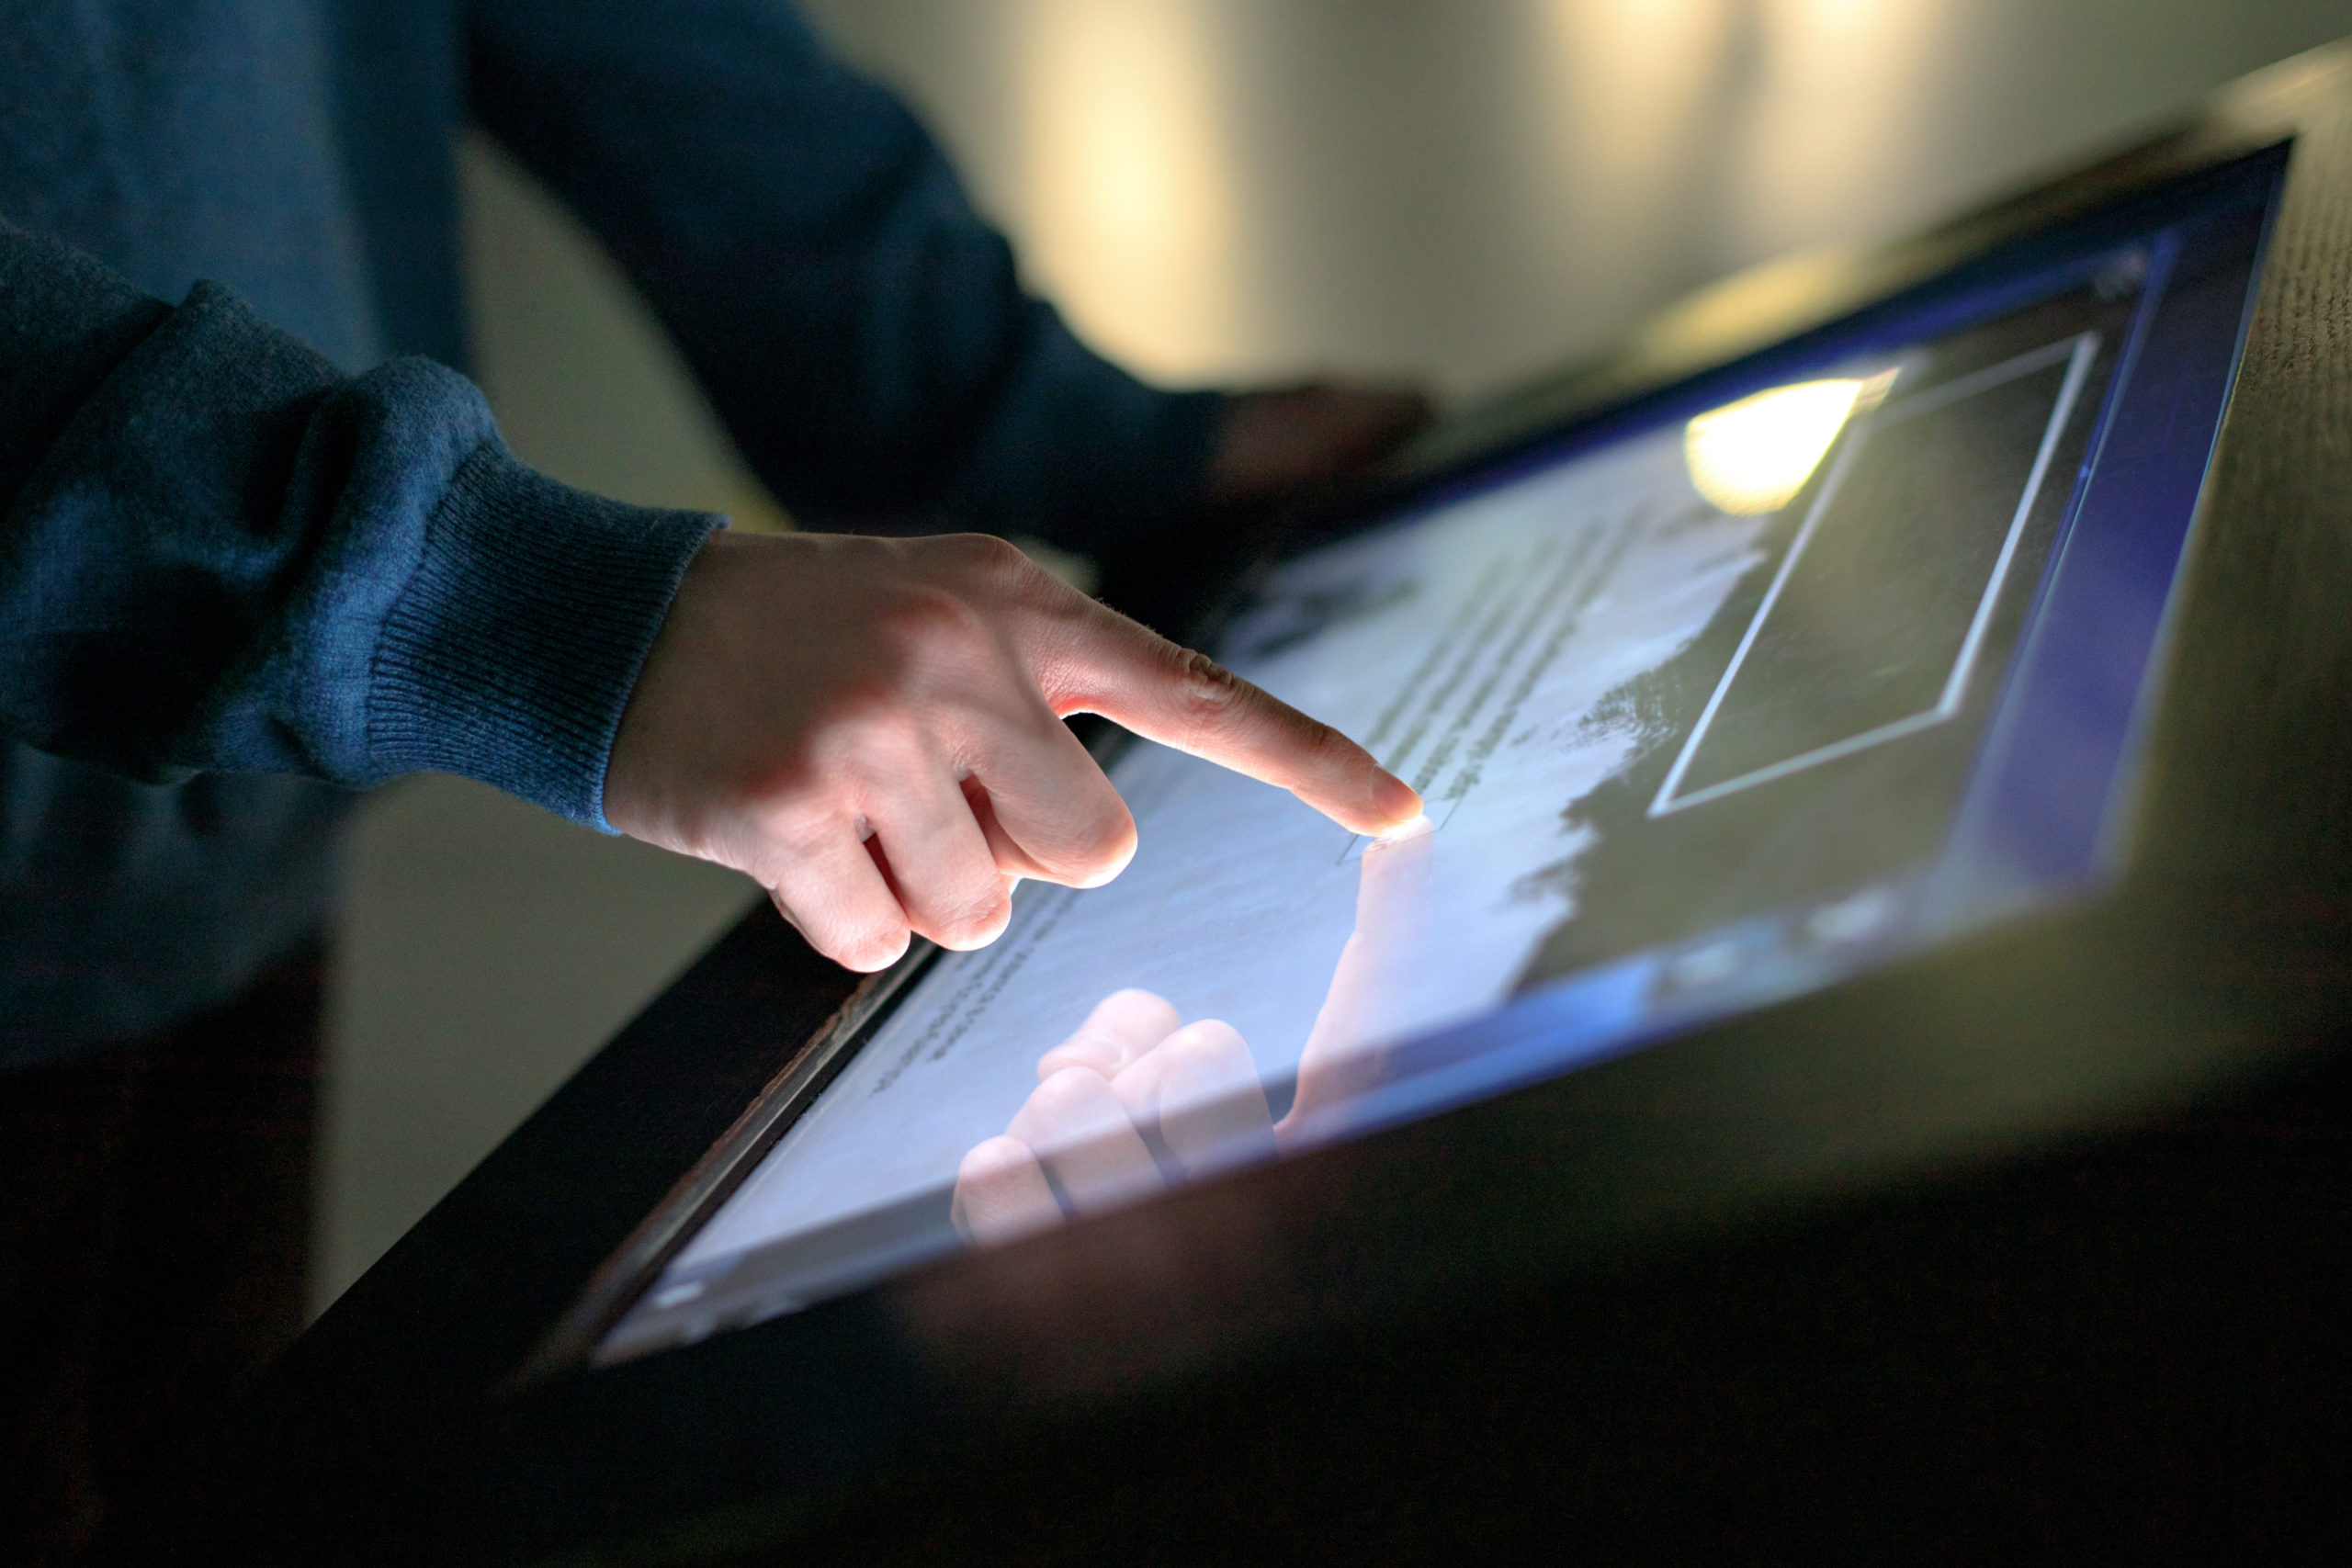 A boy uses the interactive touchscreen of an electronic multimed